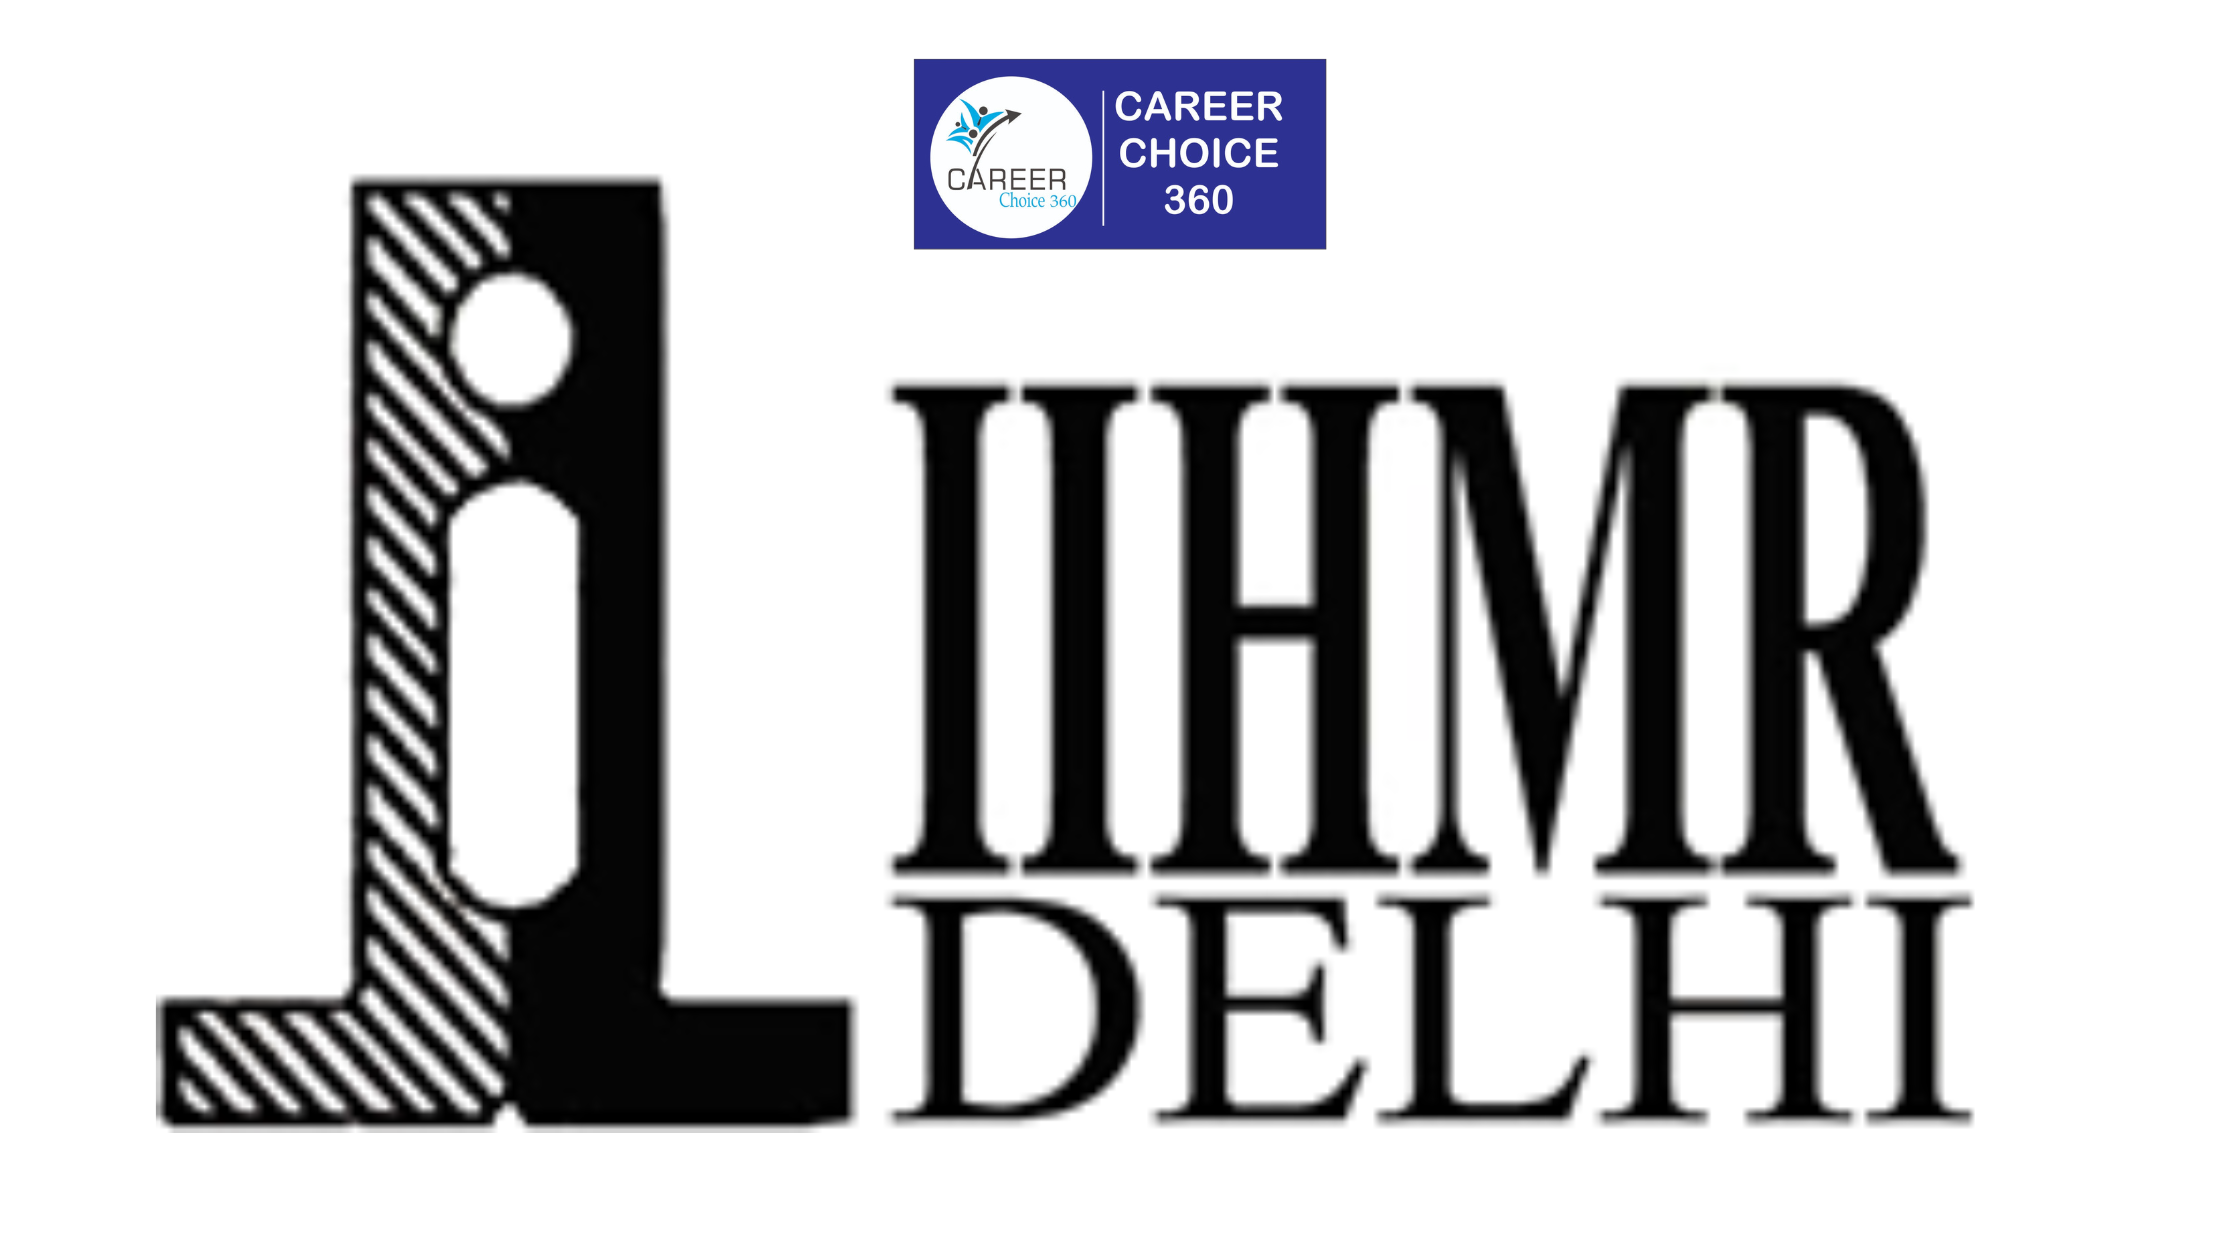 You are currently viewing International Institute of Health Management Research (IIHMR) Delhi : Highlights, Admission Dates, Courses and Fees, Admission Process, Cutoff, Placements, Rankings, FAQs